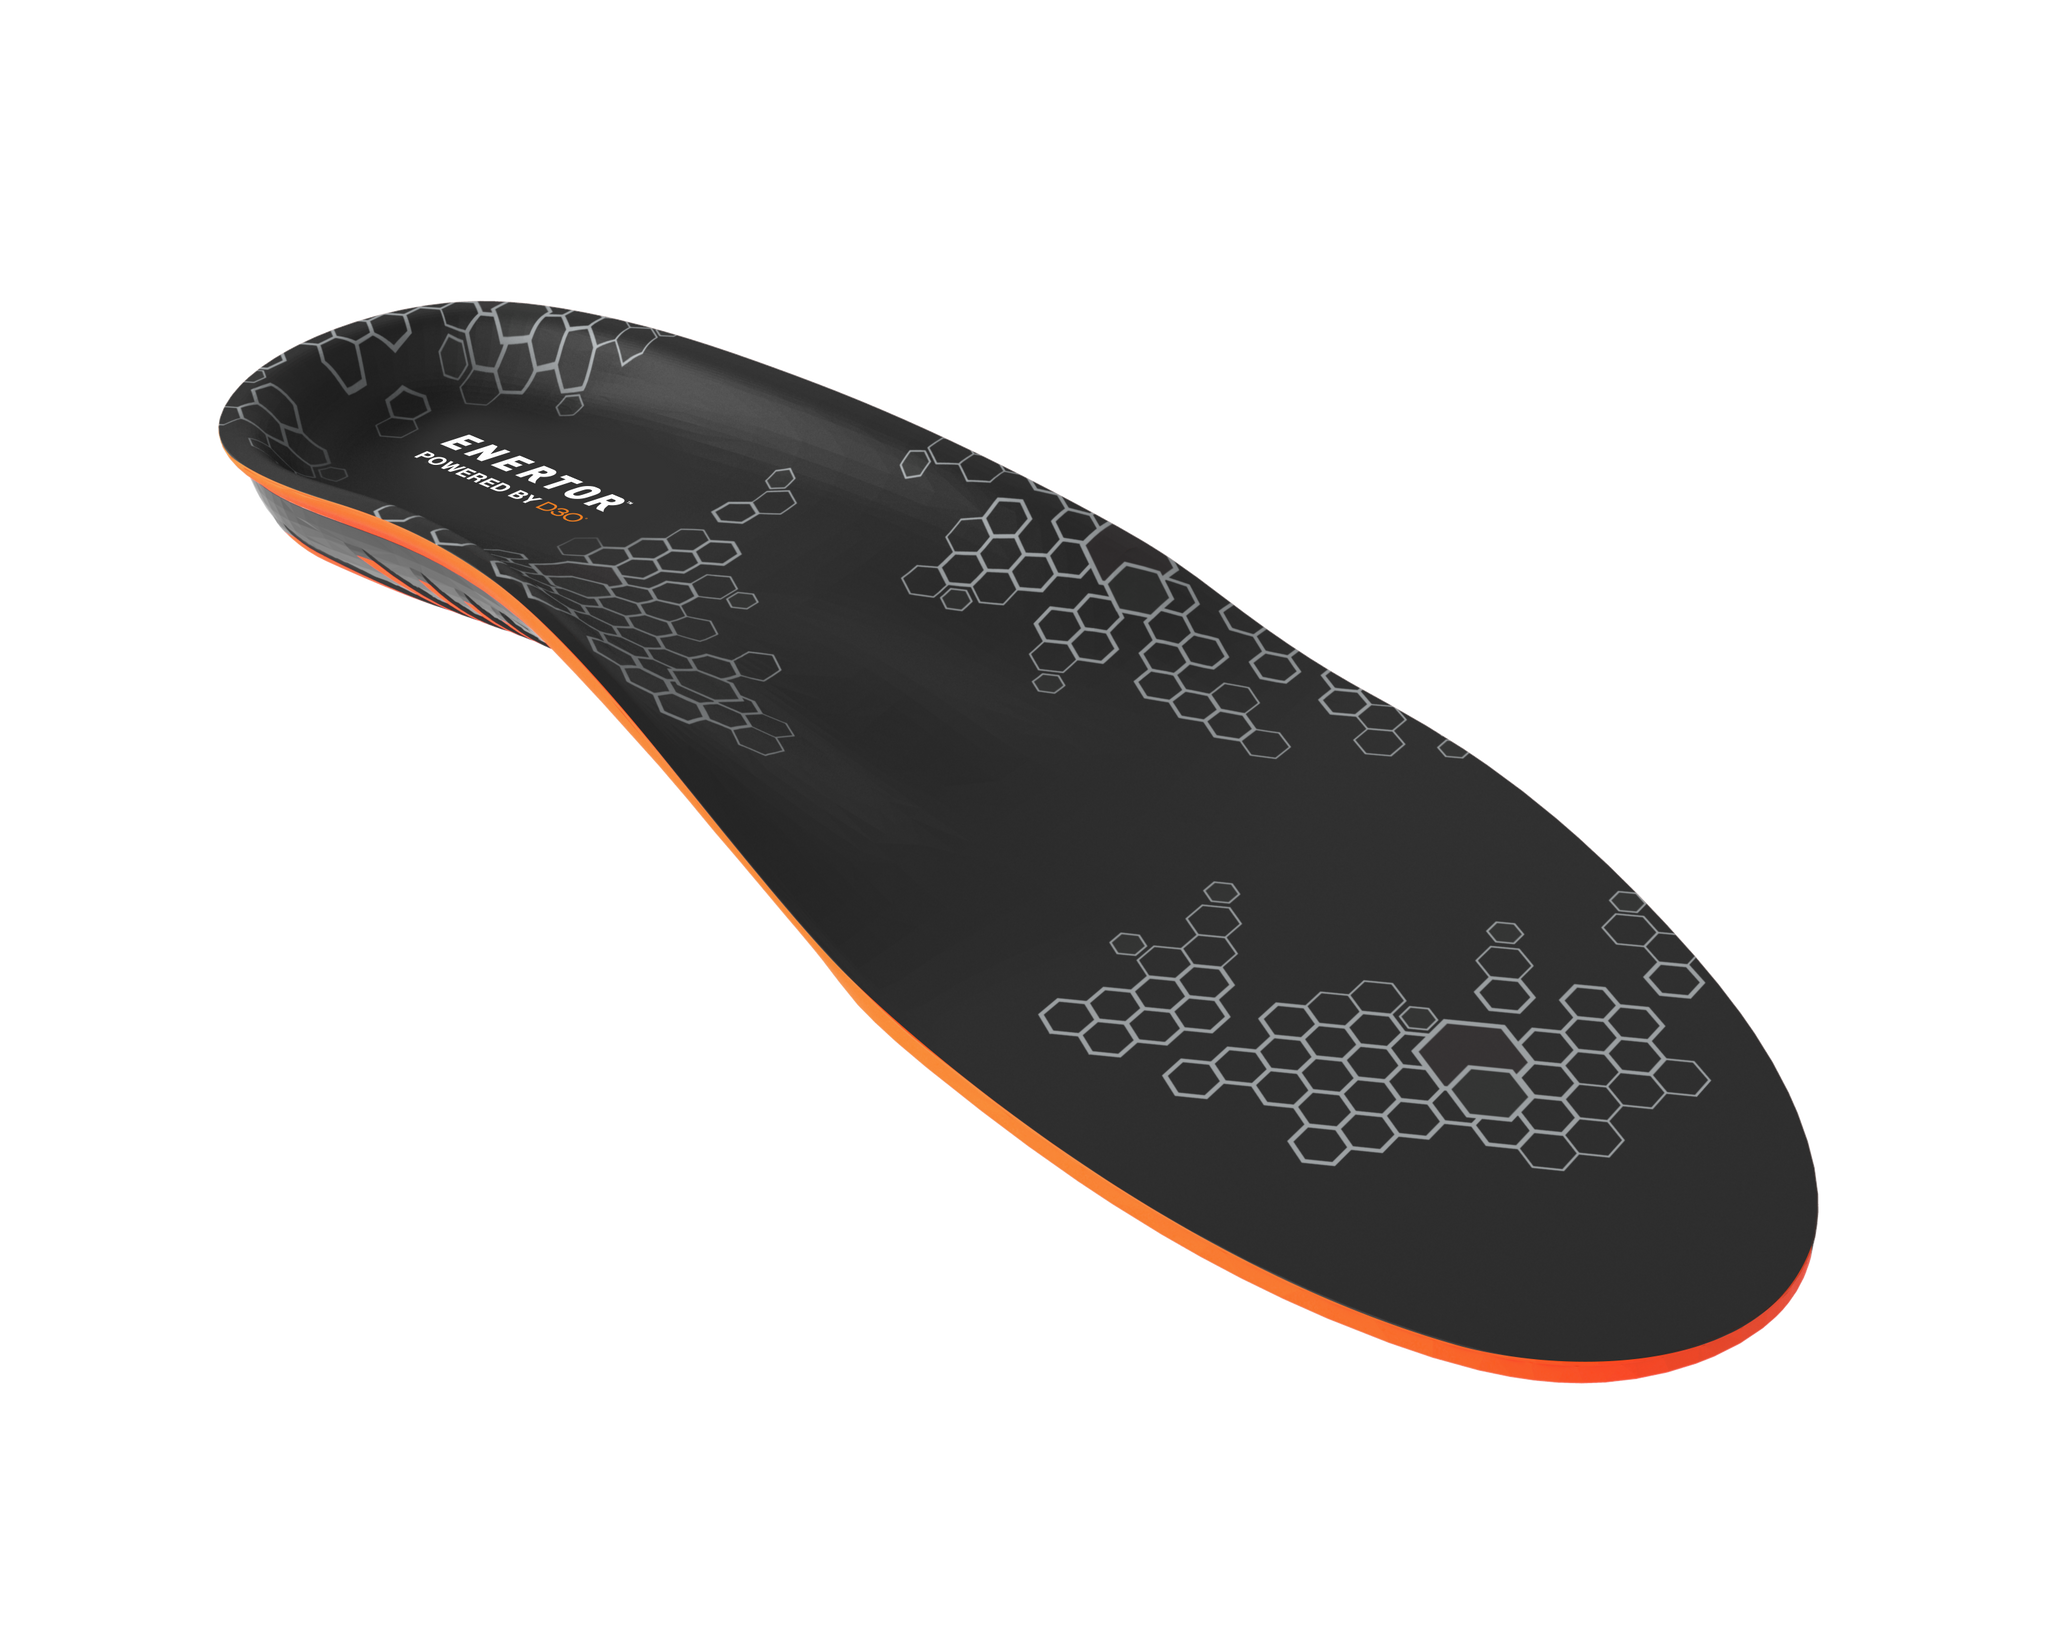 Do we really need insoles?